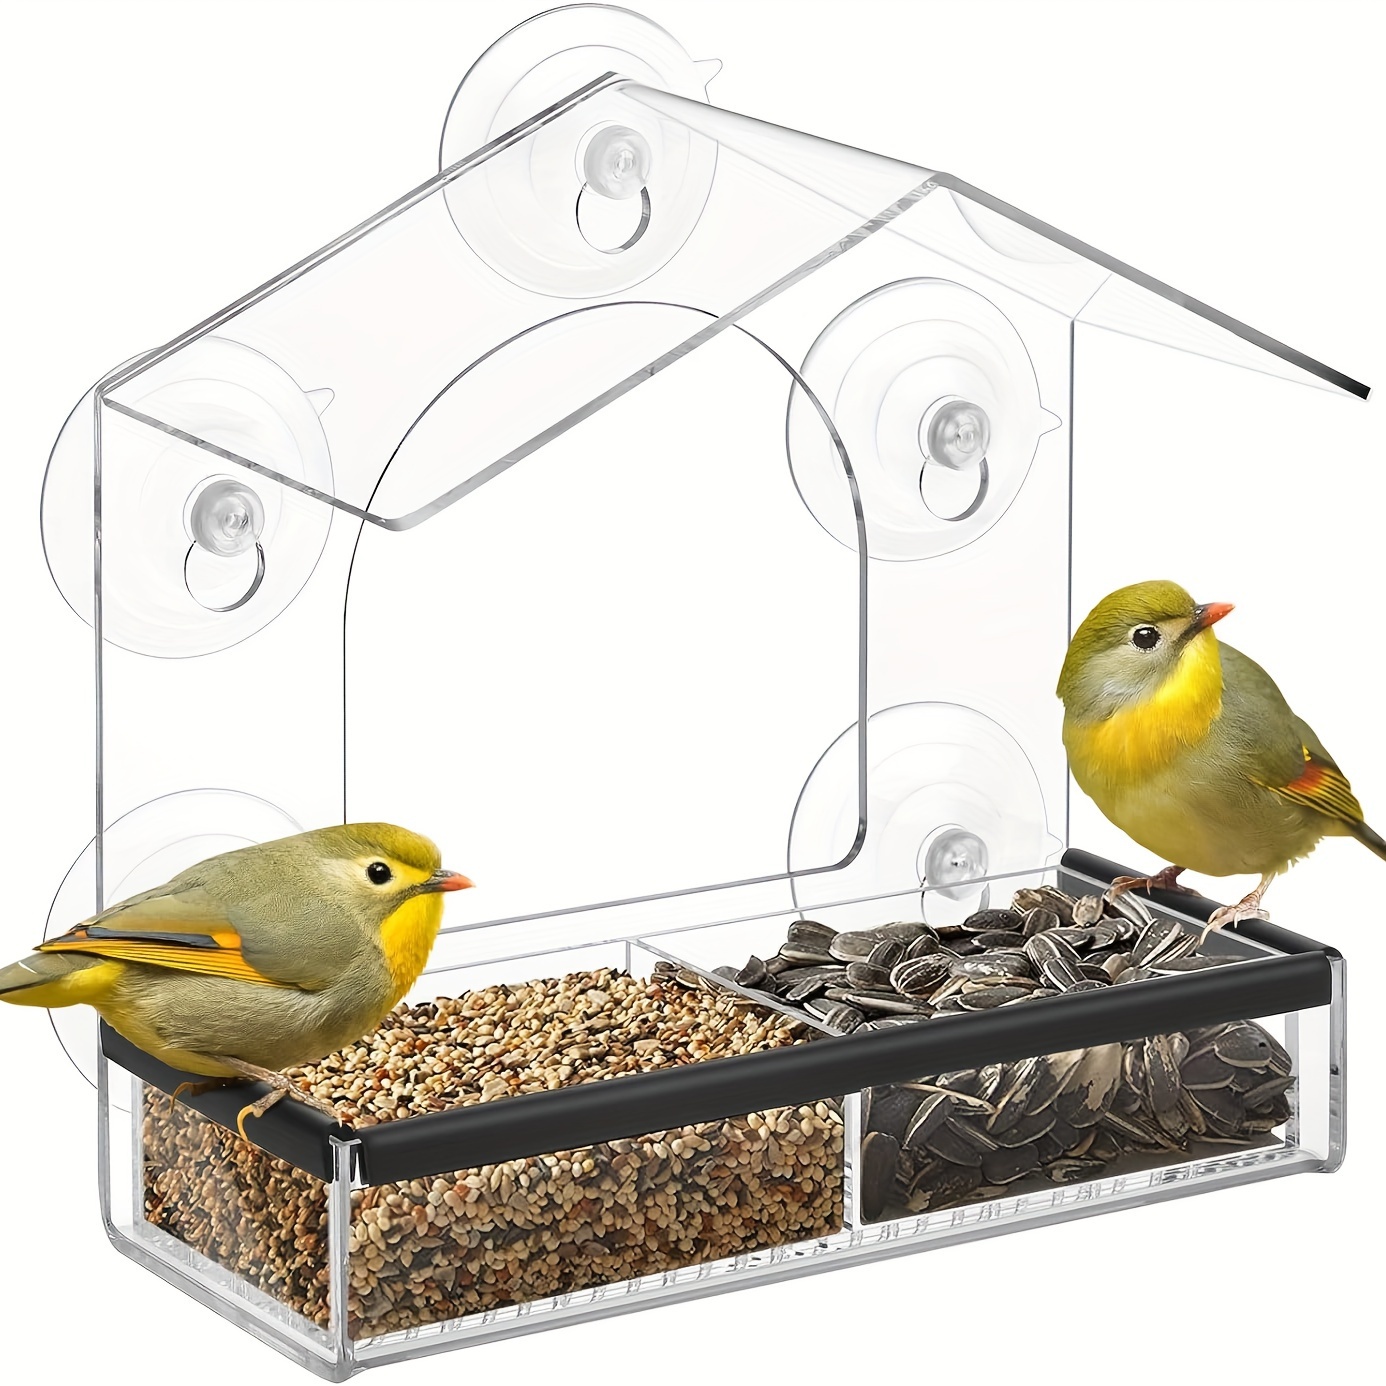 

1pc Transparent Window Bird Feeder With 5 Extra Strong Suction Cups, Drainage Holes, Detachable Seed Tray, Sturdy And Durable Acrylic Clear Birds Feeders For Viewing Wild Birds Outside